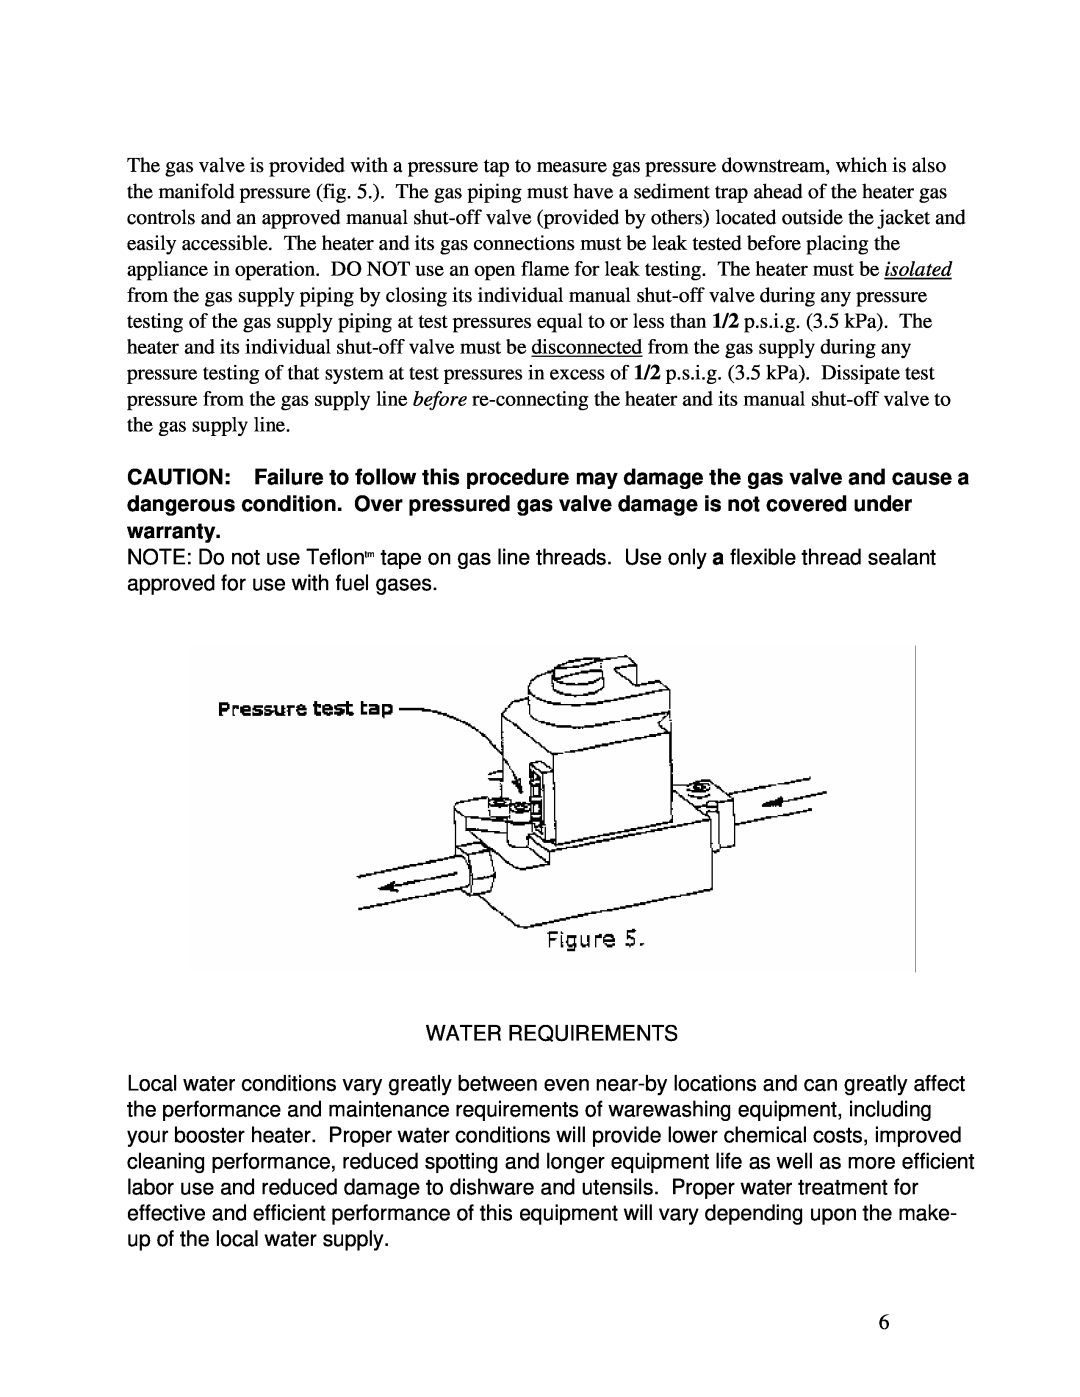 Vanguard Heating PM200, PM400 operation manual Water Requirements 